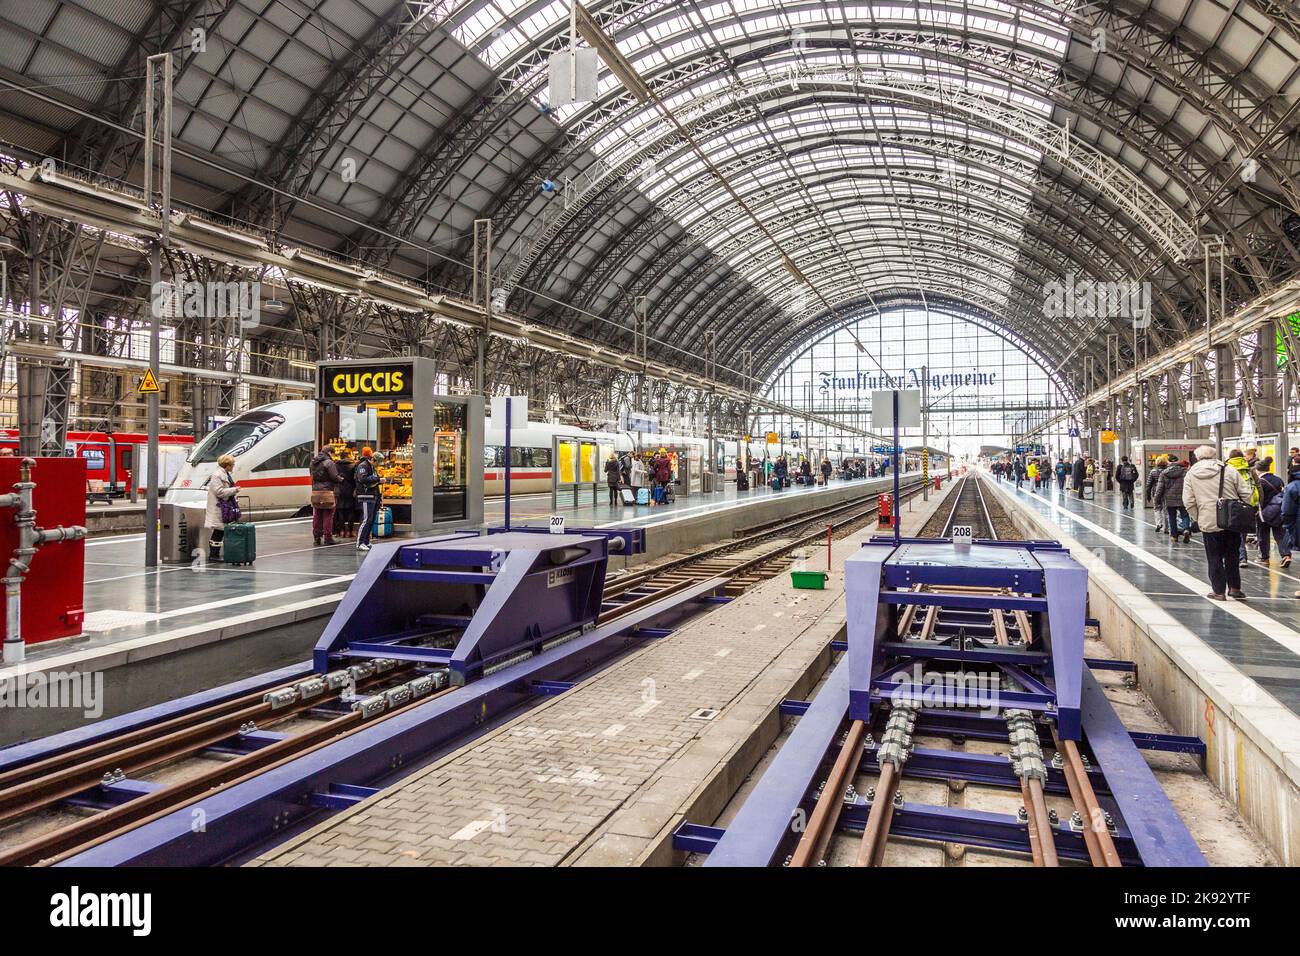 FRANKFURT, GERMANY - FEB 24, 2015: Inside the Frankfurt central station in Frankfurt, Germany. With about 350.000 passengers per day its the most freq Stock Photo